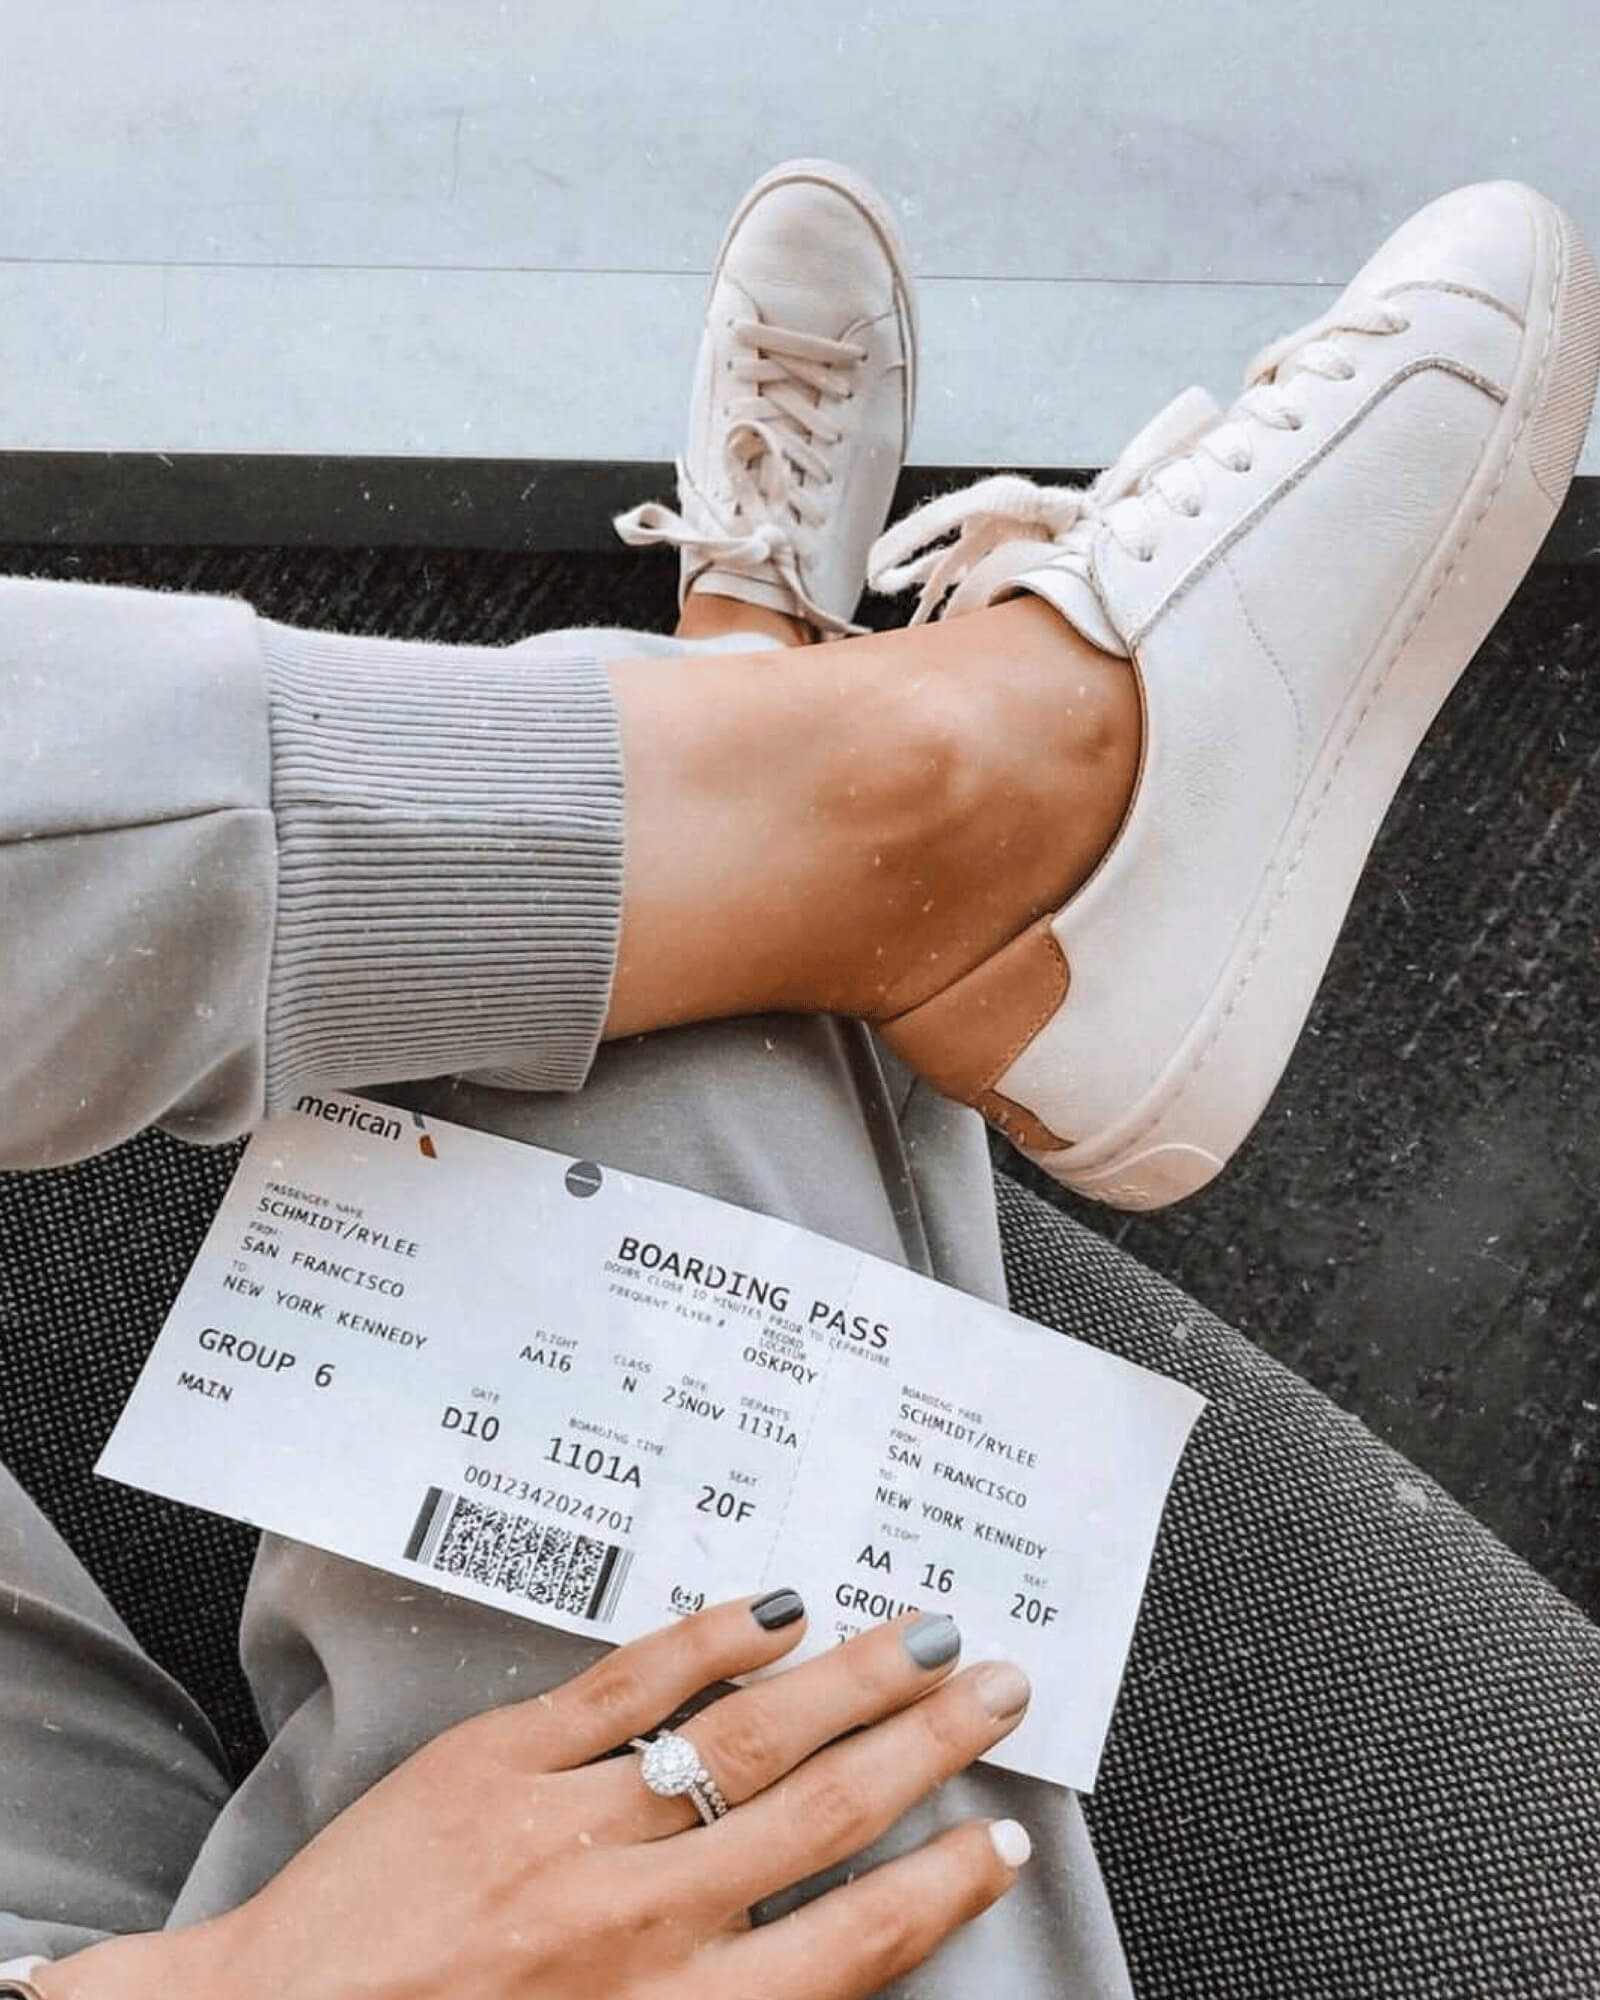 woman wearing white Ibiza Sneakers crossing her legs with a boarding pass in her hand